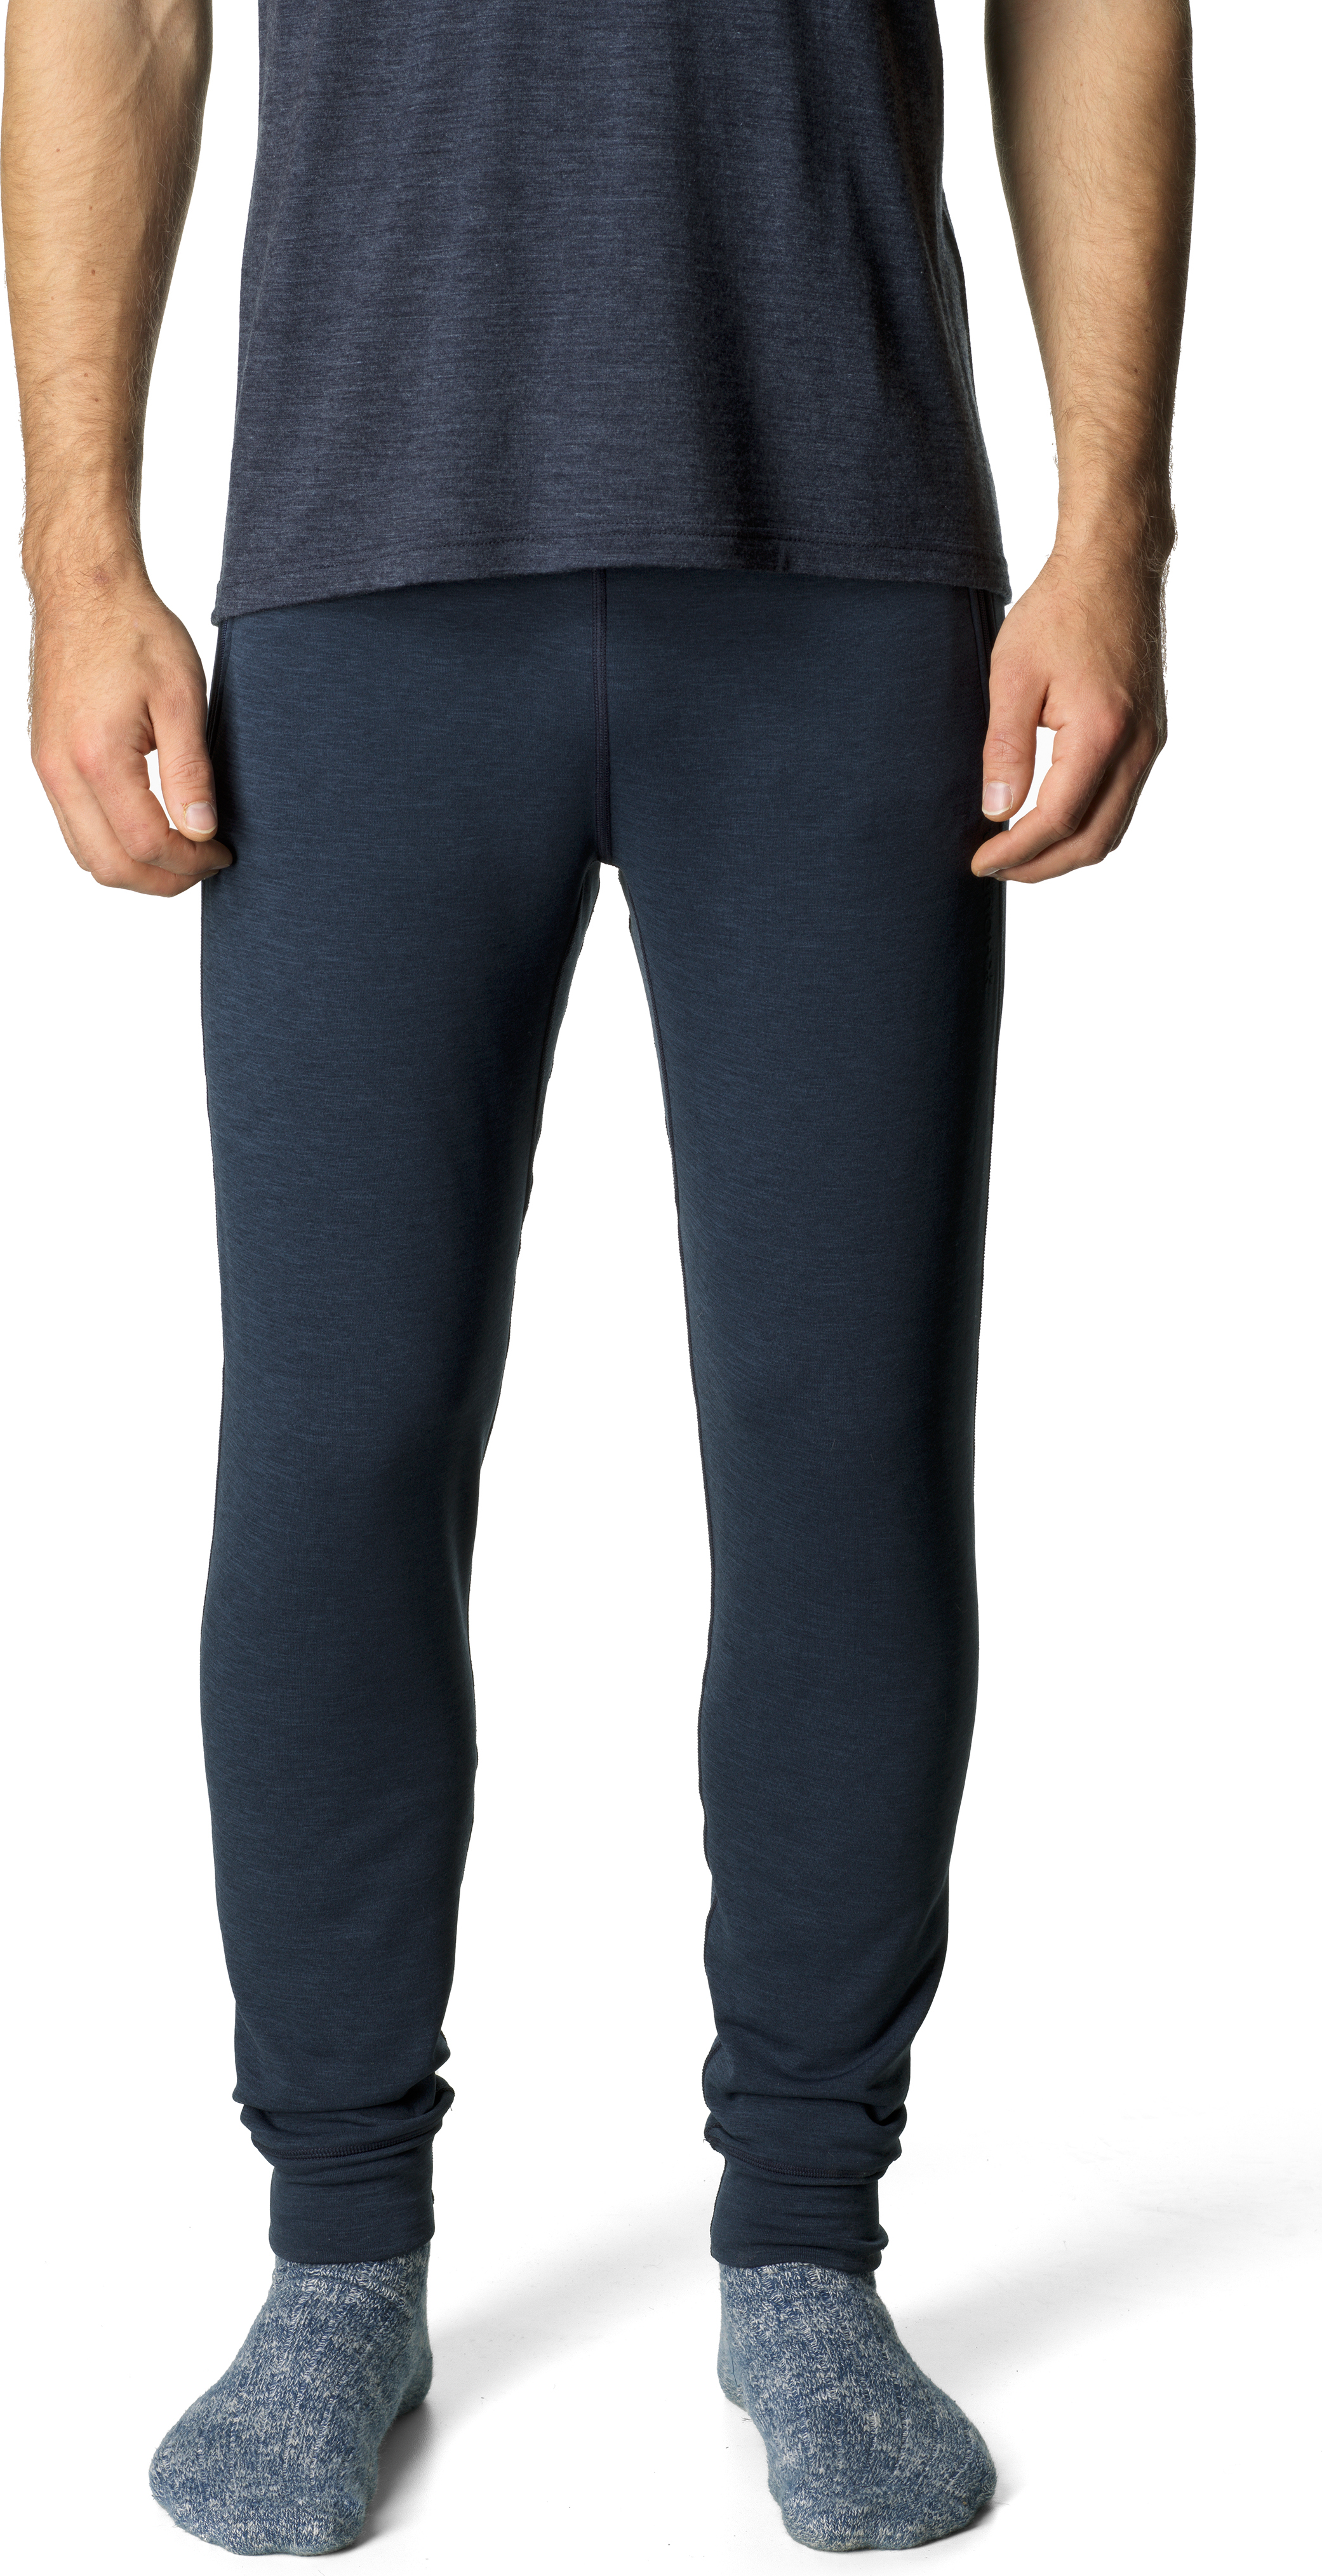 Houdini Men’s Outright Pants Cloudy Blue